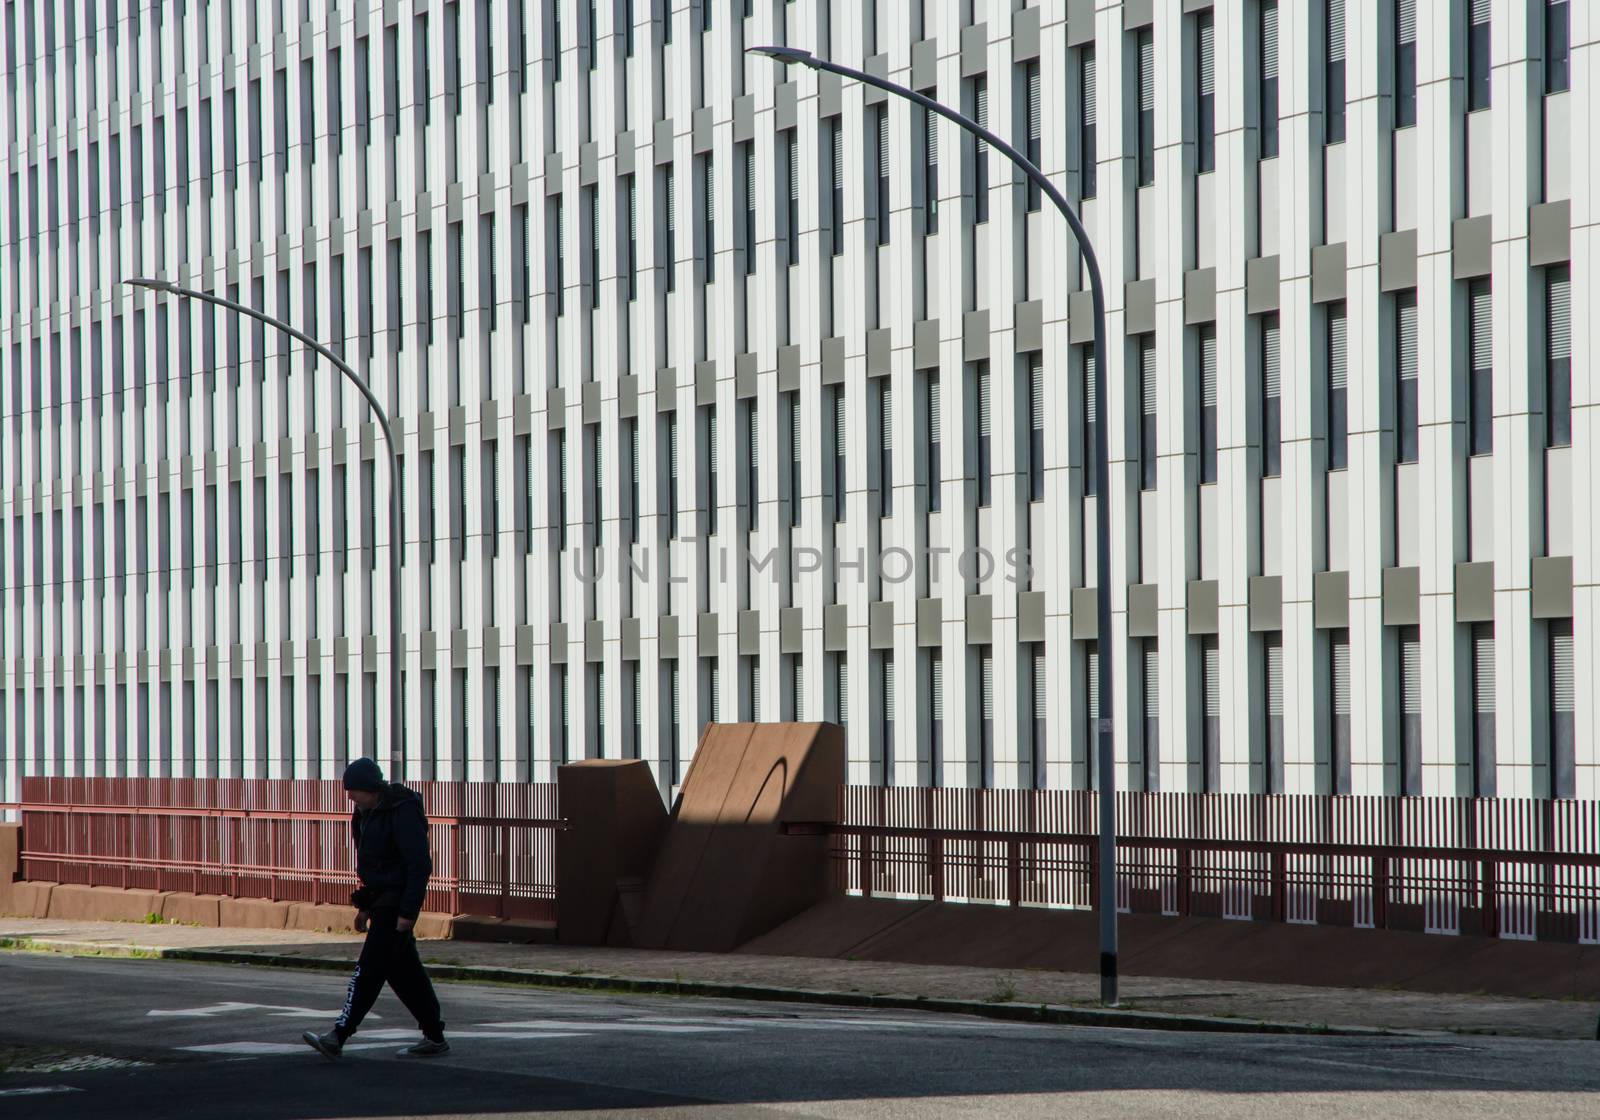 A lonely man crosses the street early Sunday morning, in the shadow of a closed office building